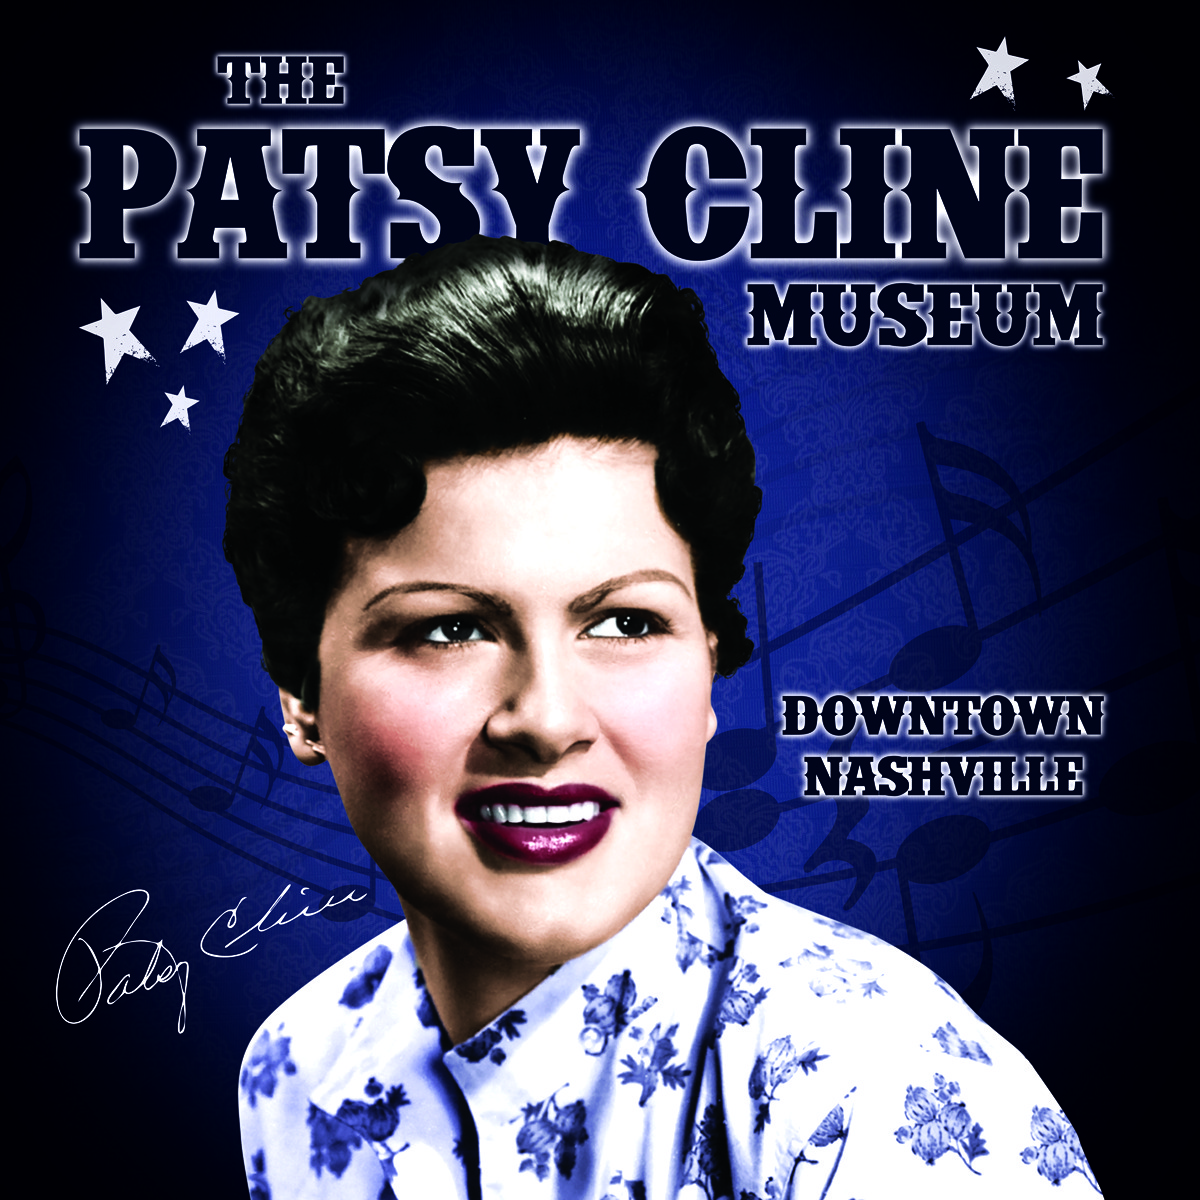 Patsy Cline Museum to Open in Nashville, Tennessee